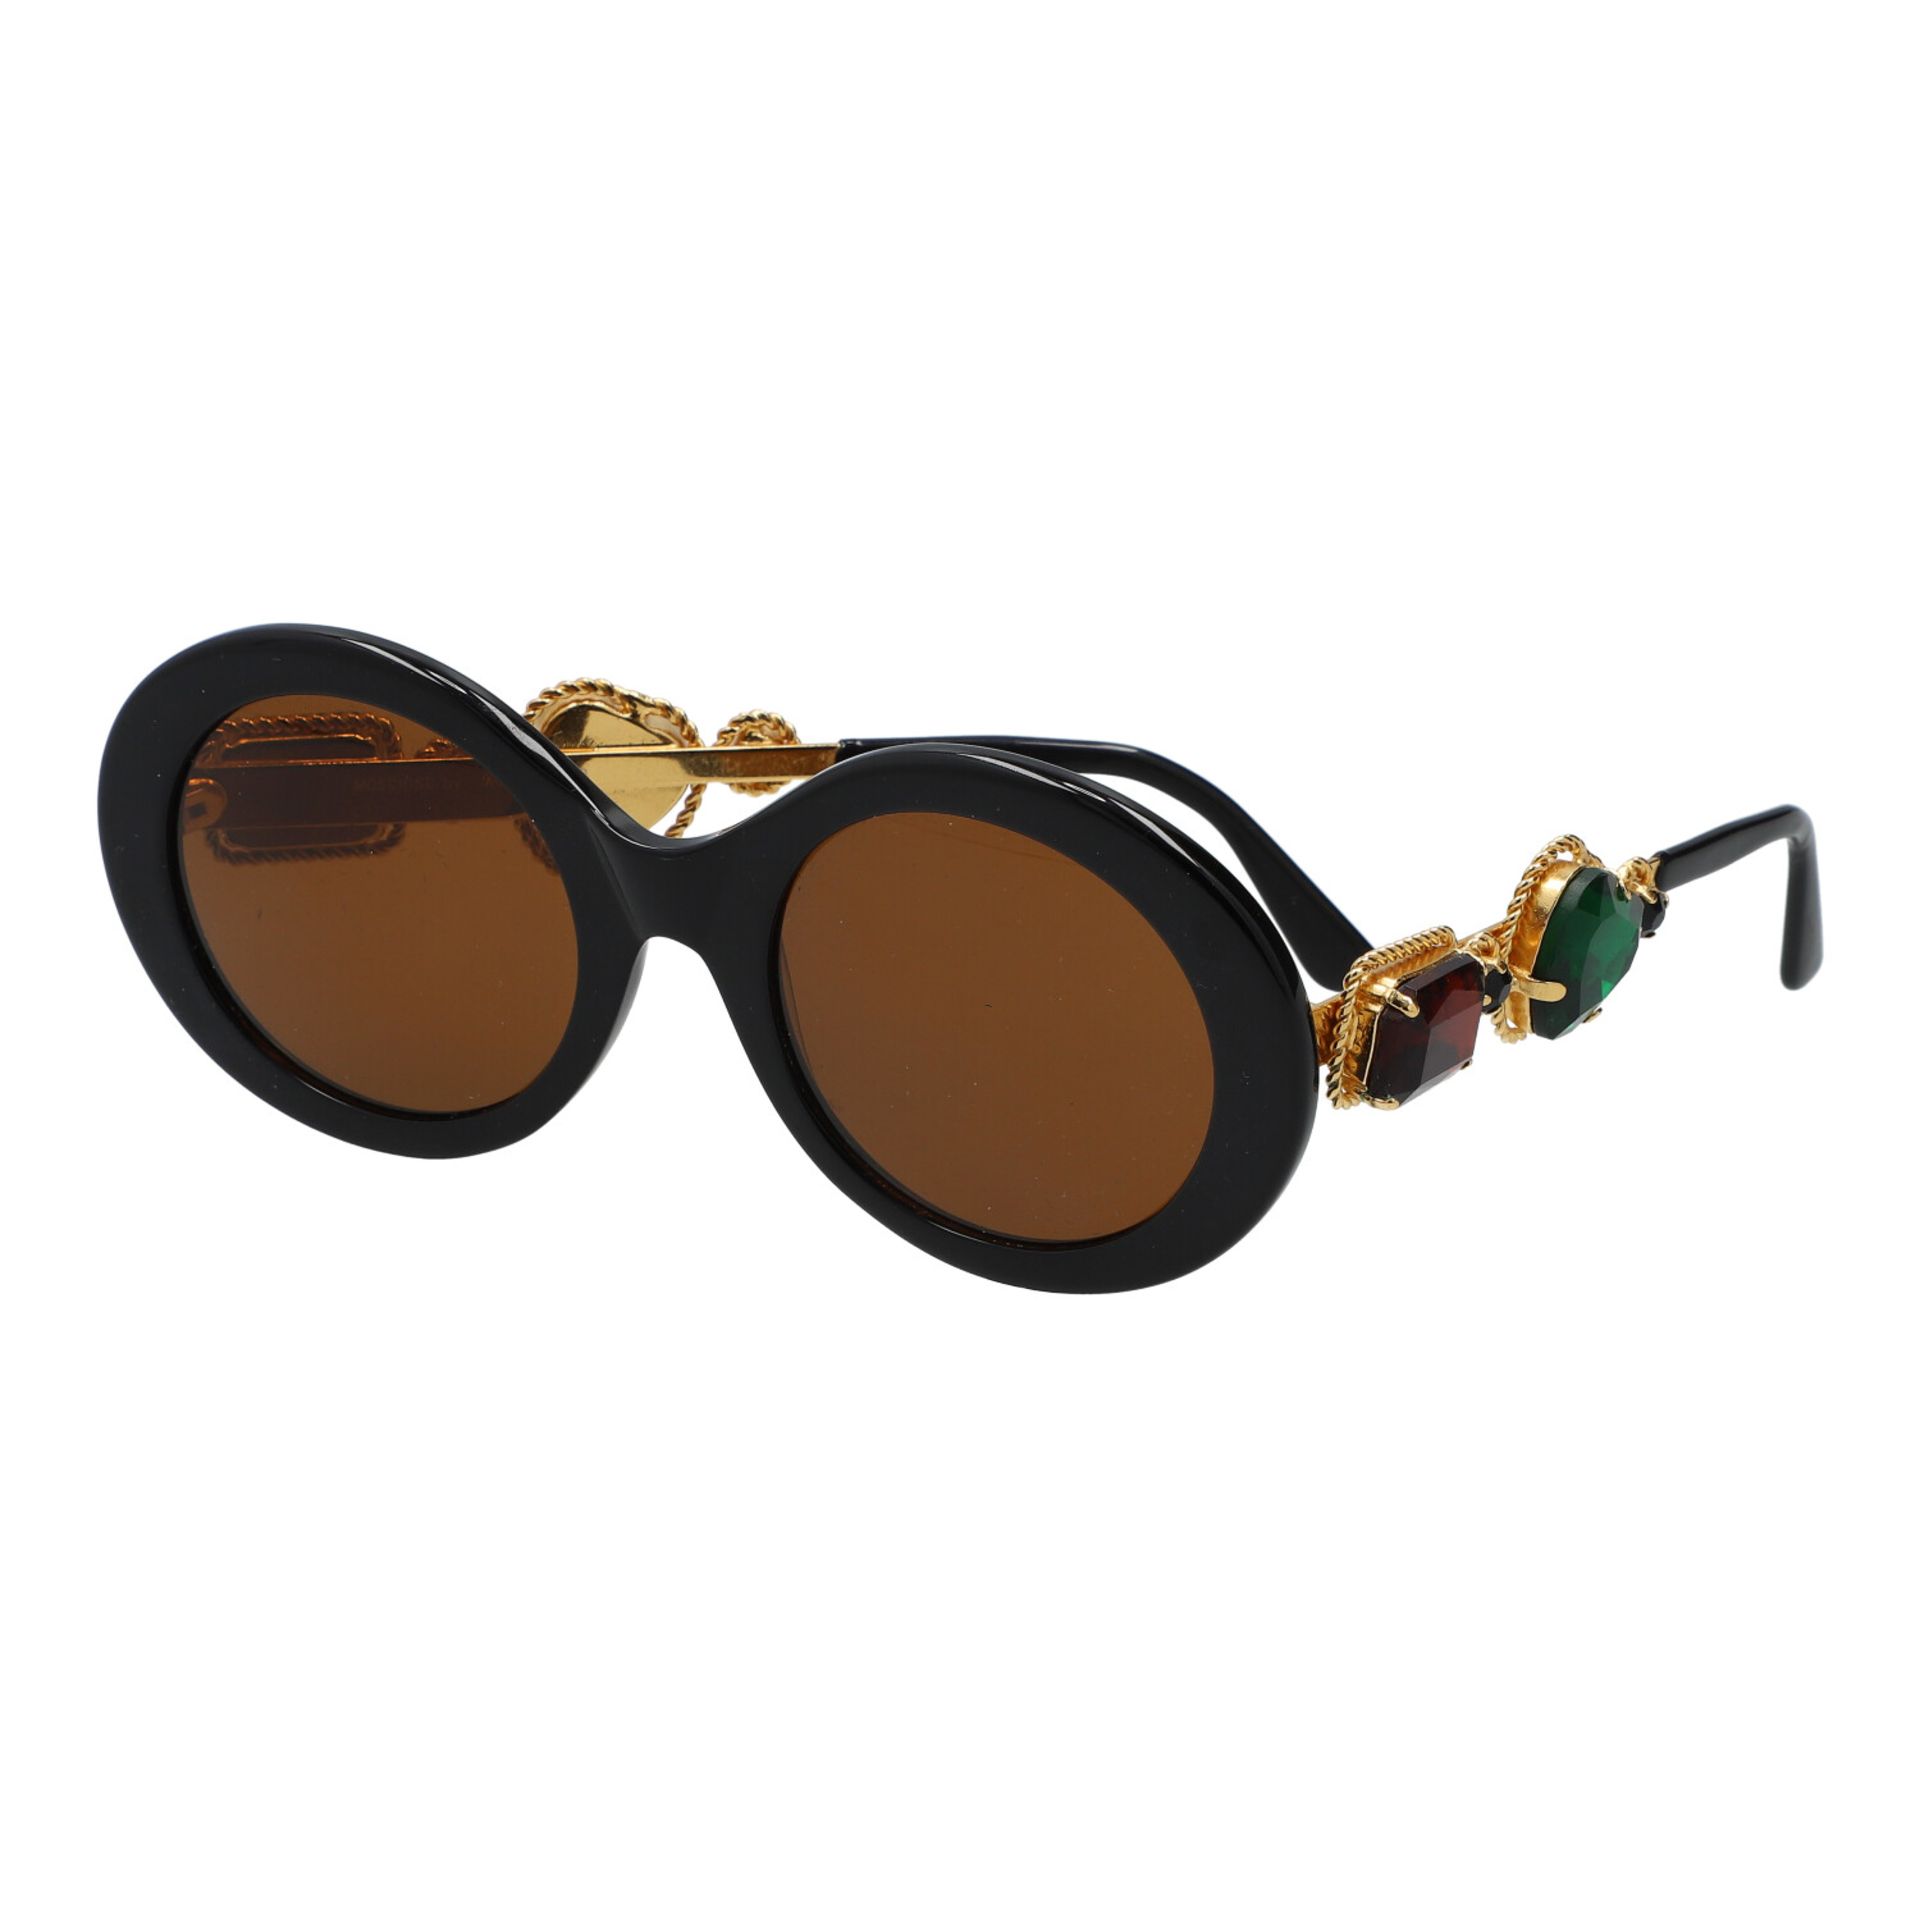 MOSCHINO BY PERSOL VINTAGE Sonnenbrille "M253 - LADY GAGA", Koll.: 1989. - Image 6 of 6